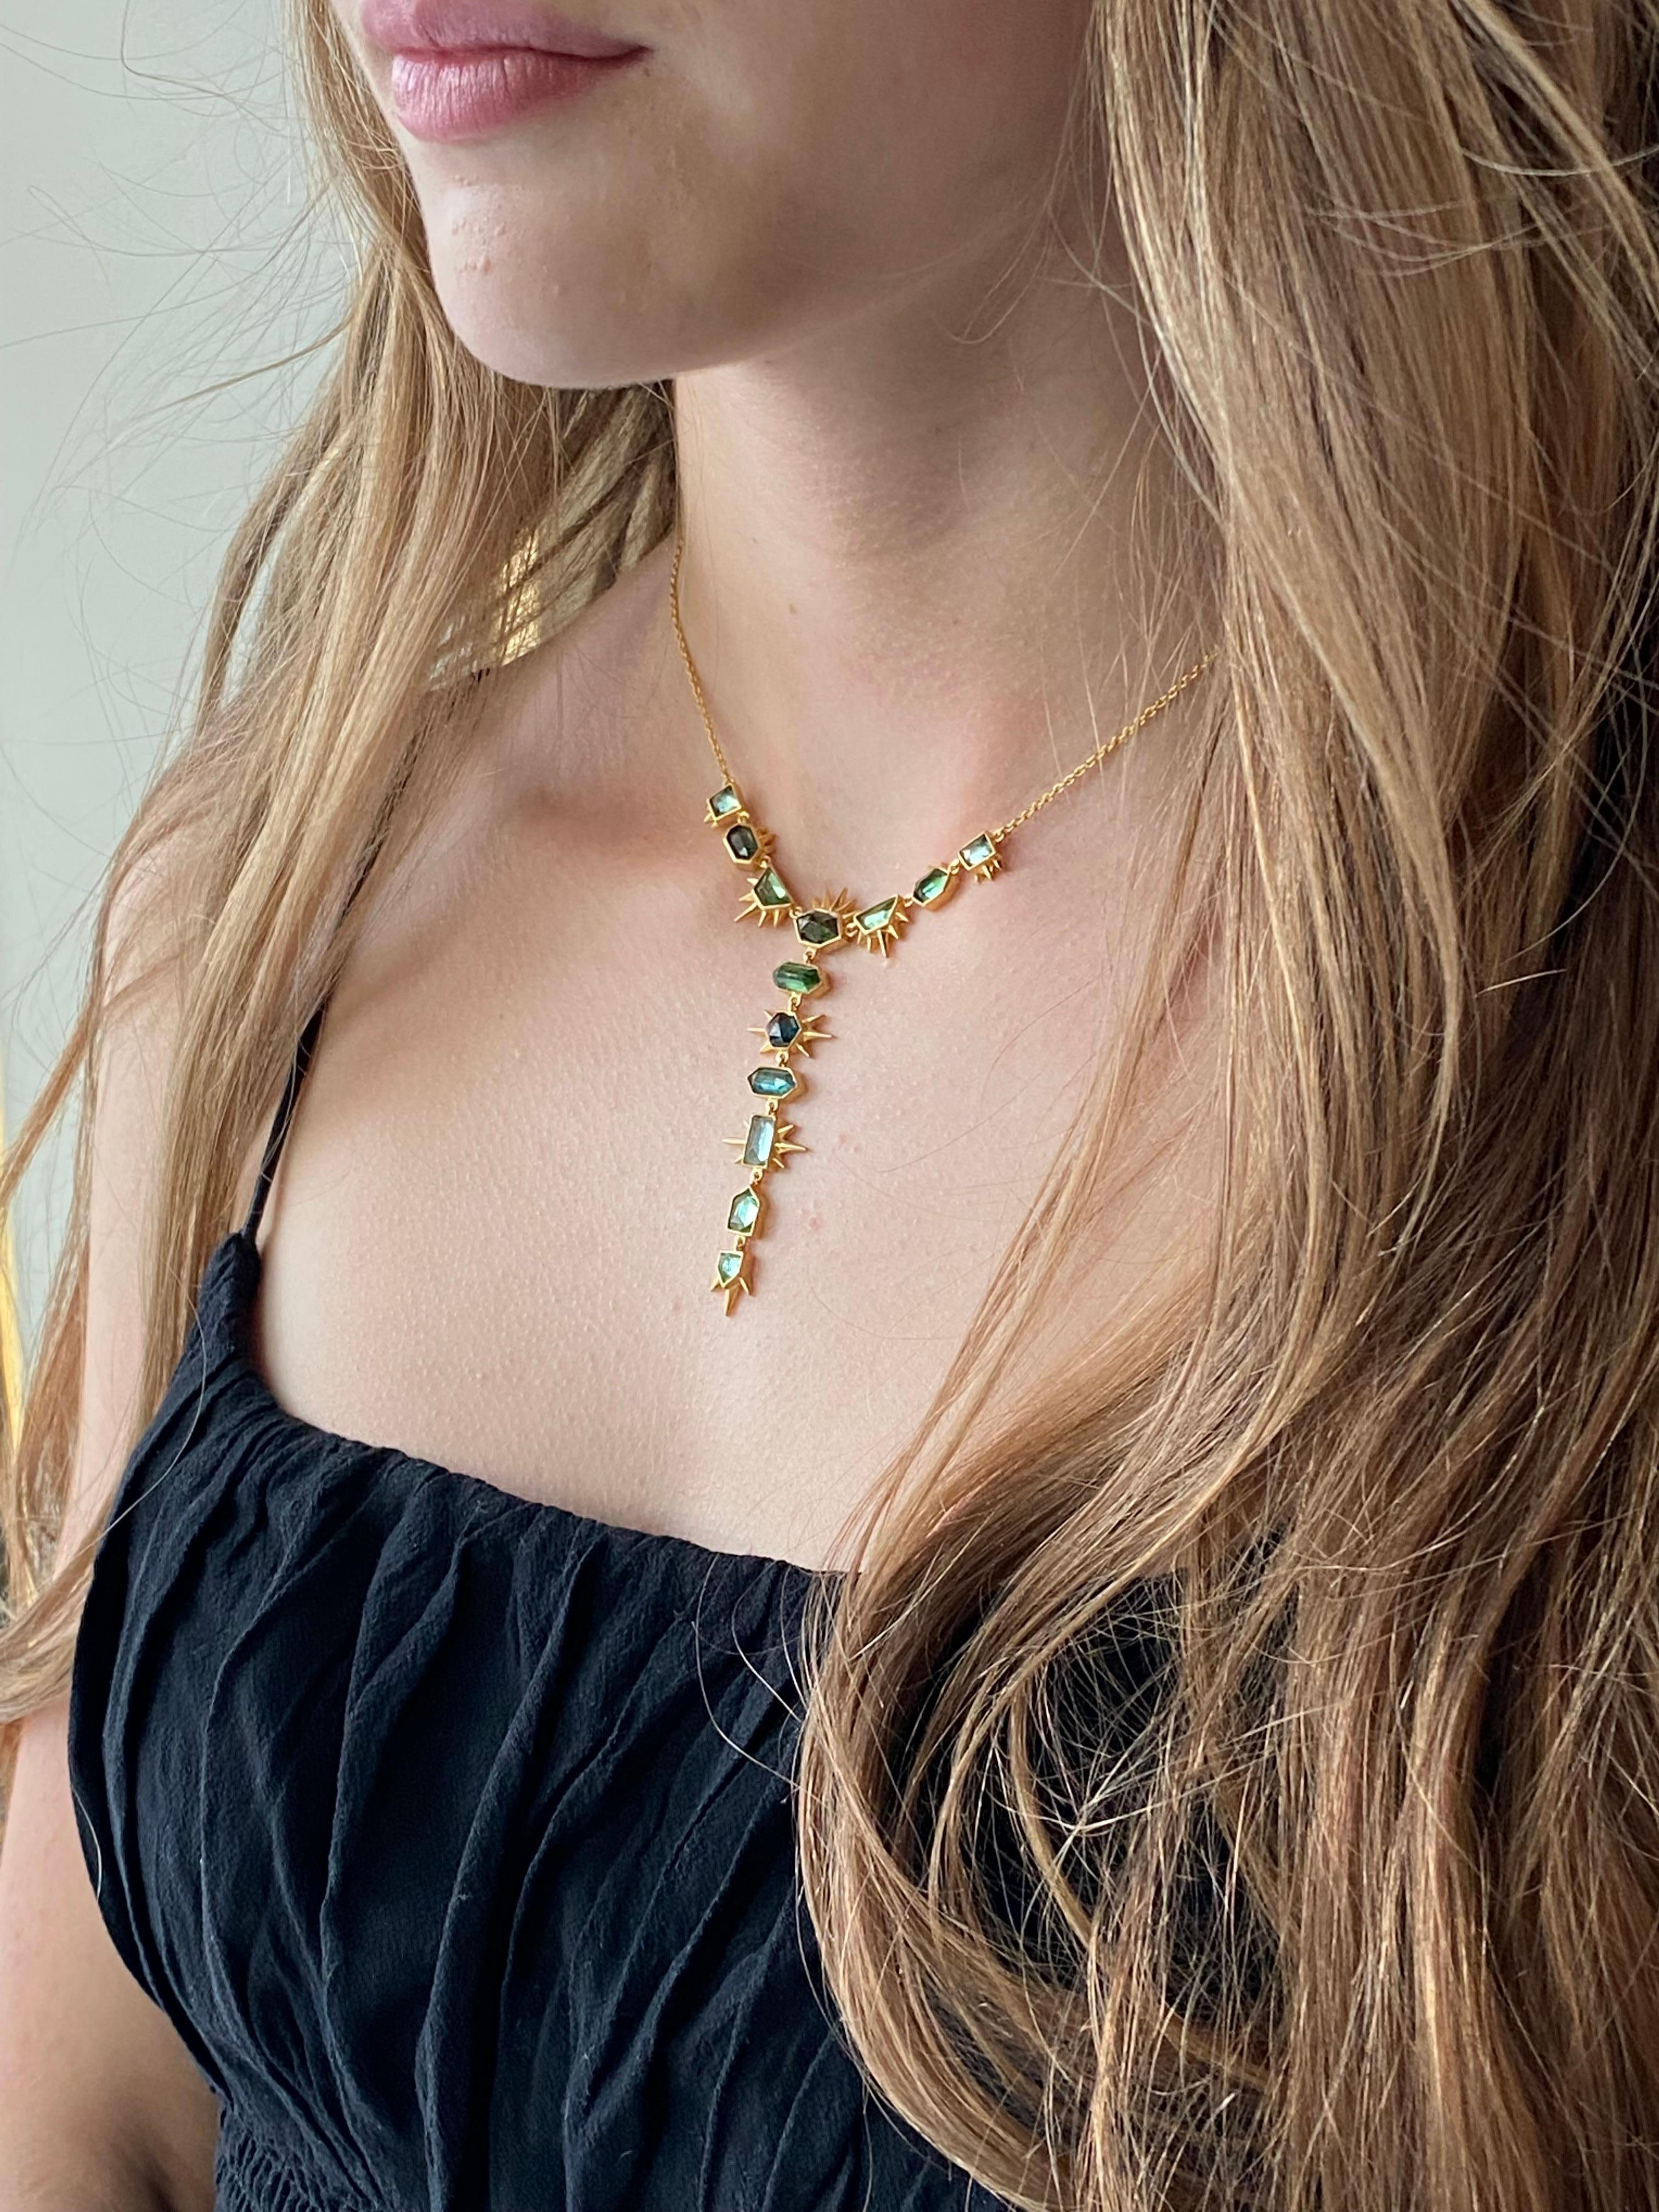 Designed by award winning jewelry designer, Lauren Harper, this spectacular 6.91 carat multi shade Green Tourmaline and 18kt Gold necklace is a stunning addition to any jewelry collection.  Each green tourmaline is a uniquely faceted geometric